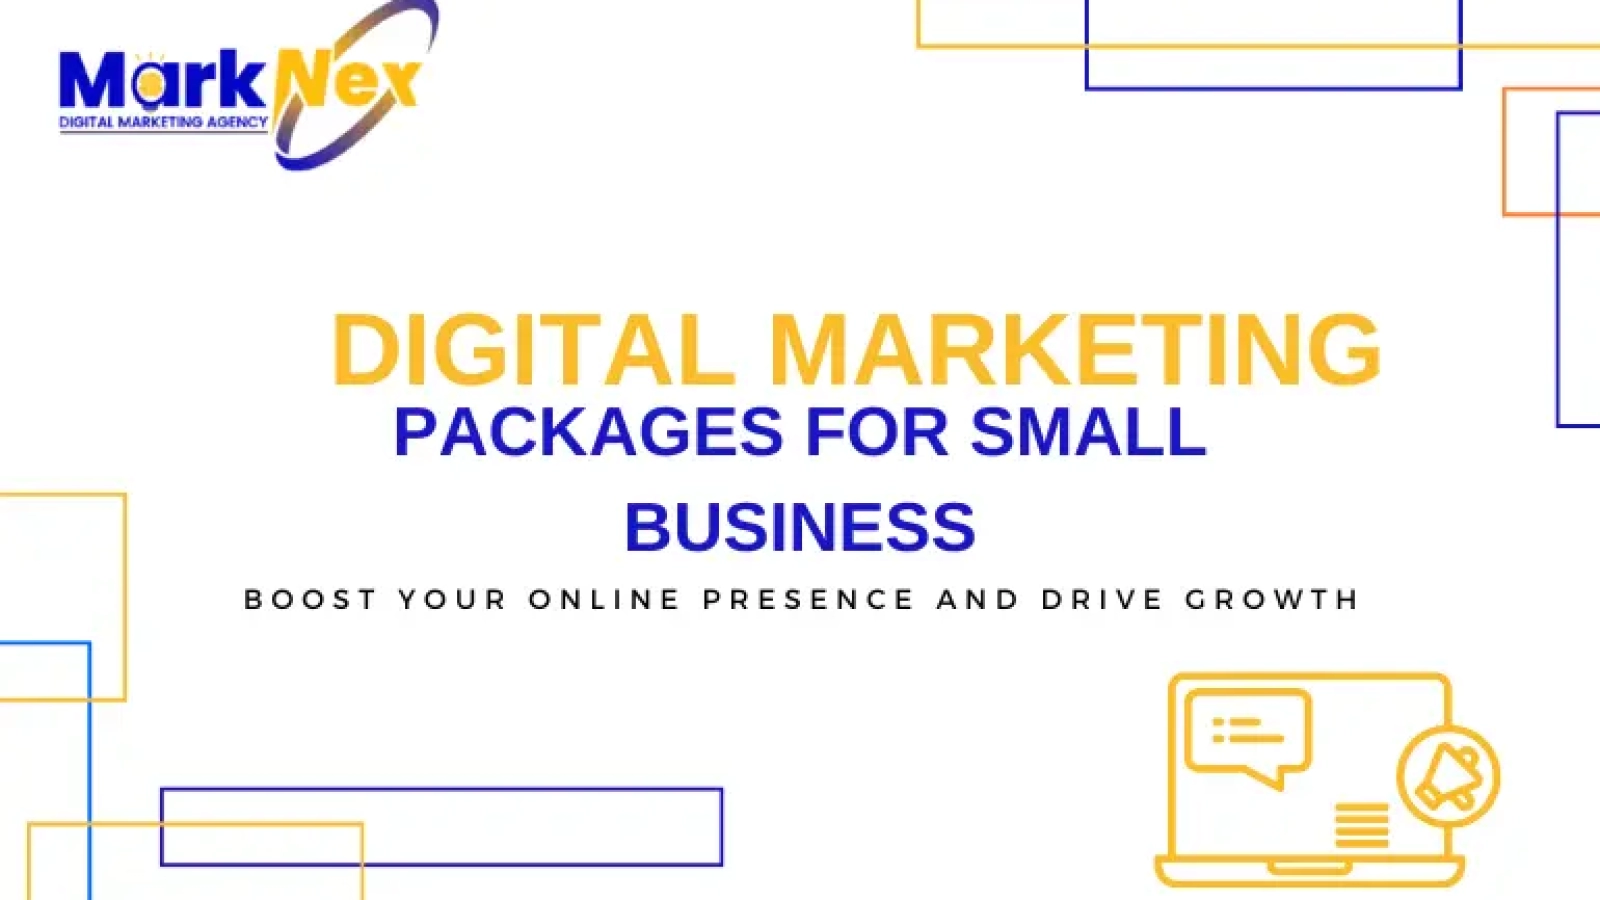 Digital Marketing Packages for Small Business